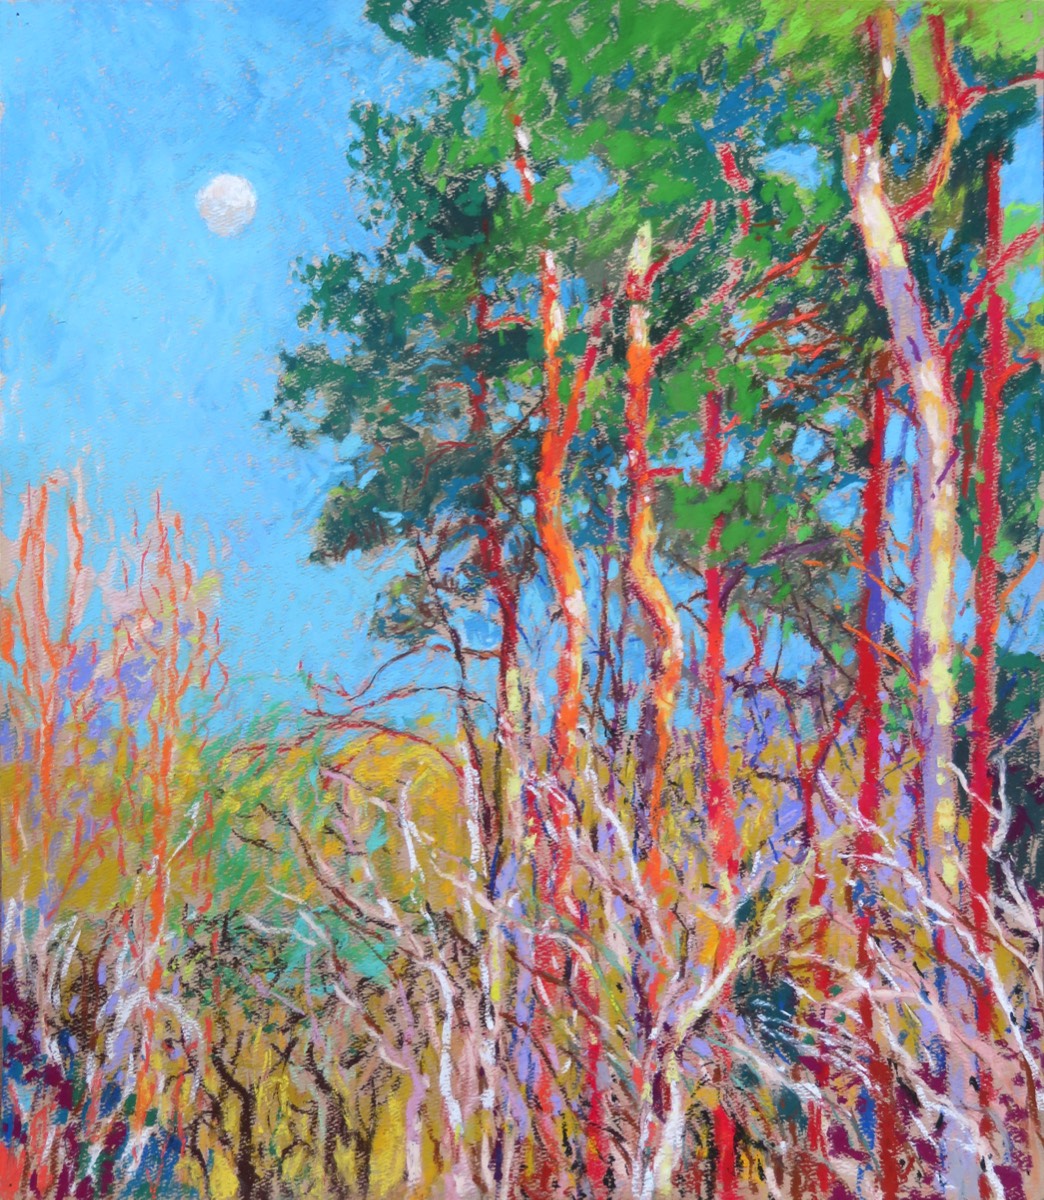 13th of the Moon Scotts Pine evening light - pastel - 20 X 17.25 inches - Created 25th April 2021 - available on request